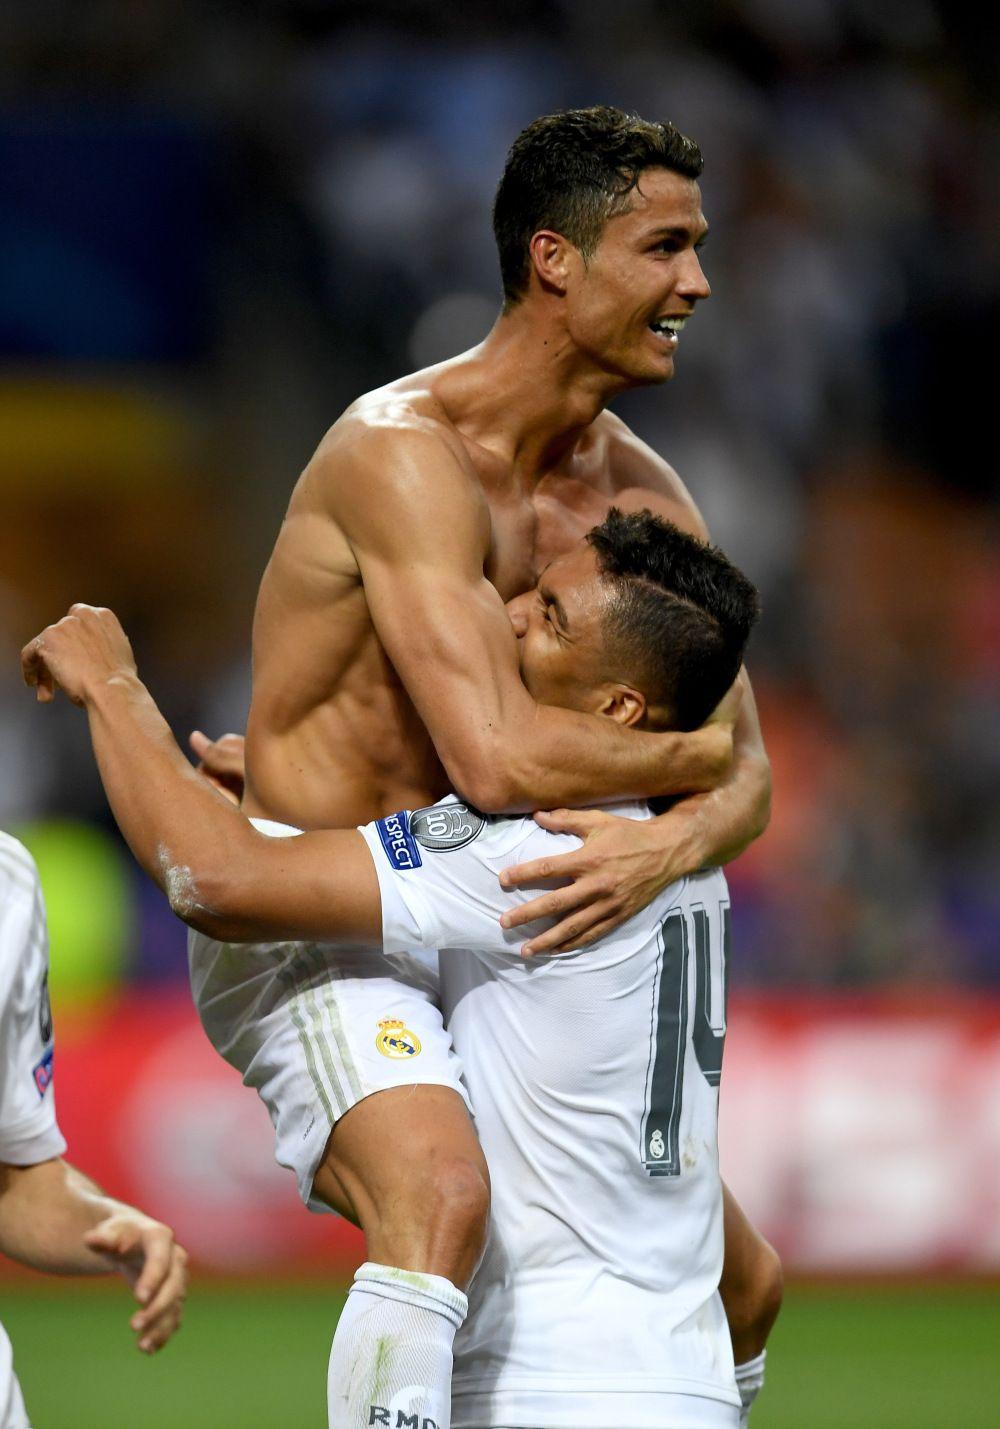 top photo from Cristiano Ronaldo's celebration after scoring